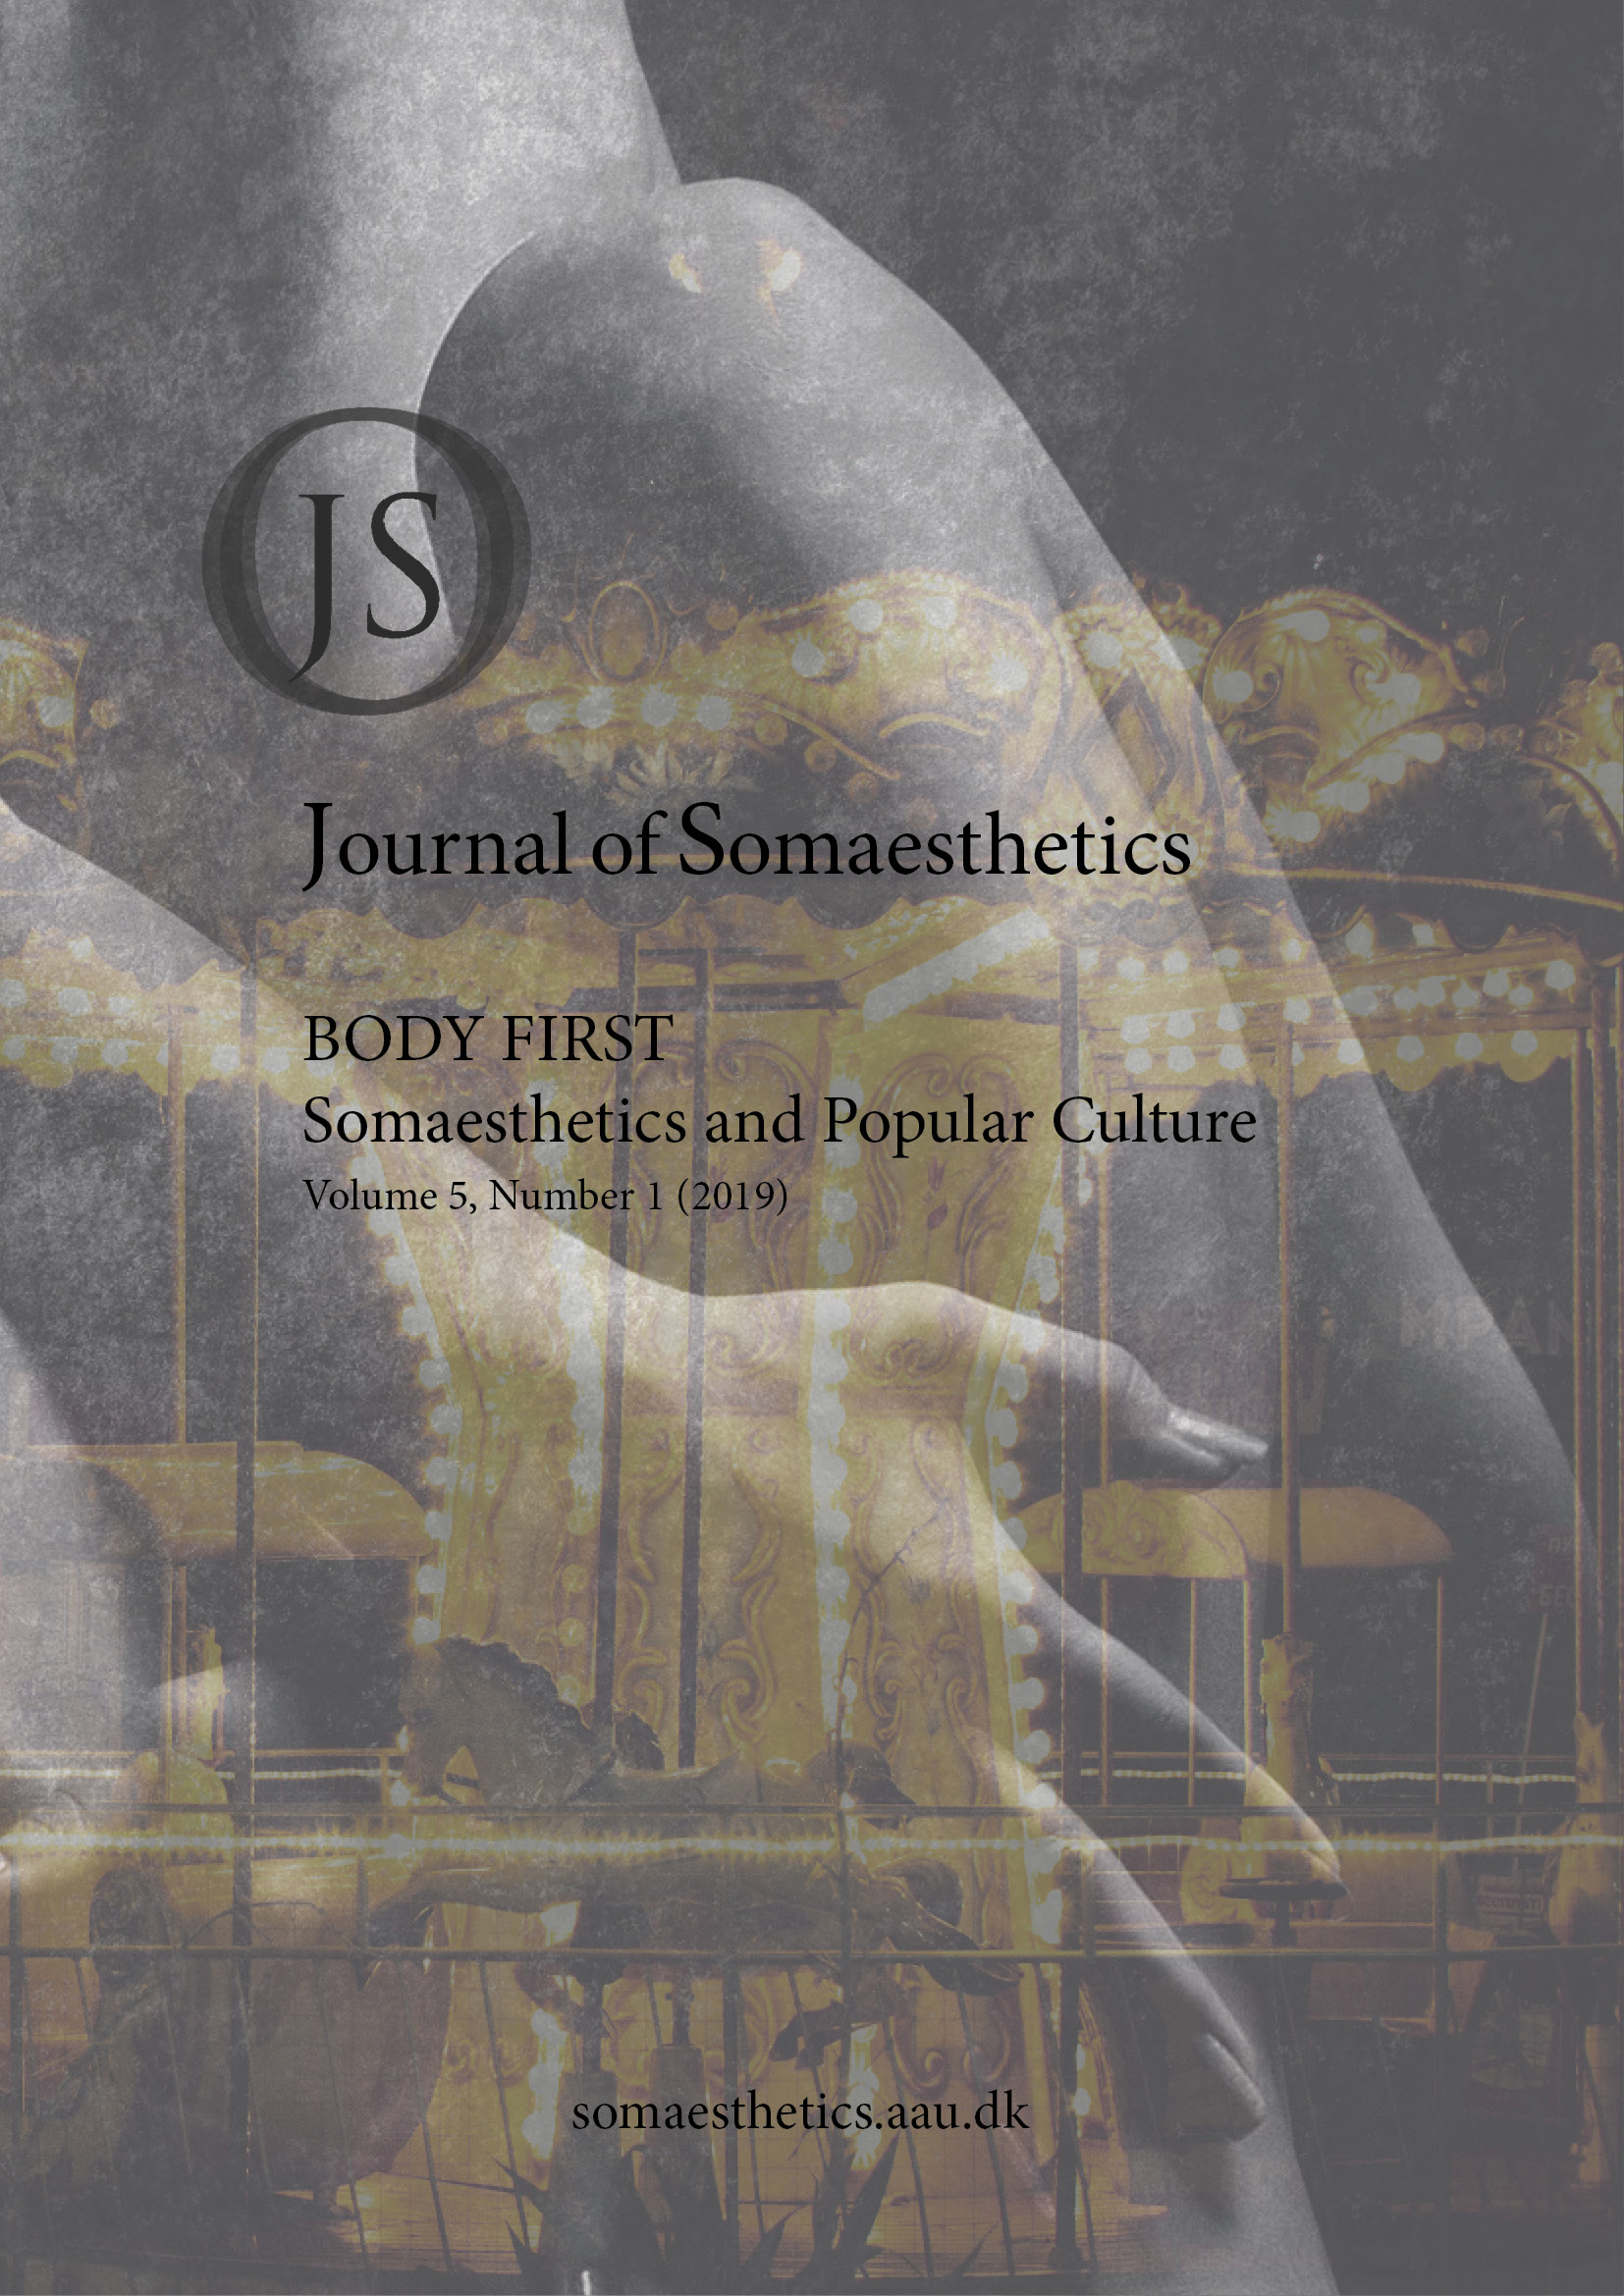 					View Vol. 5 No. 1 (2019): BODY FIRST: Somaesthetics and Popular Culture
				